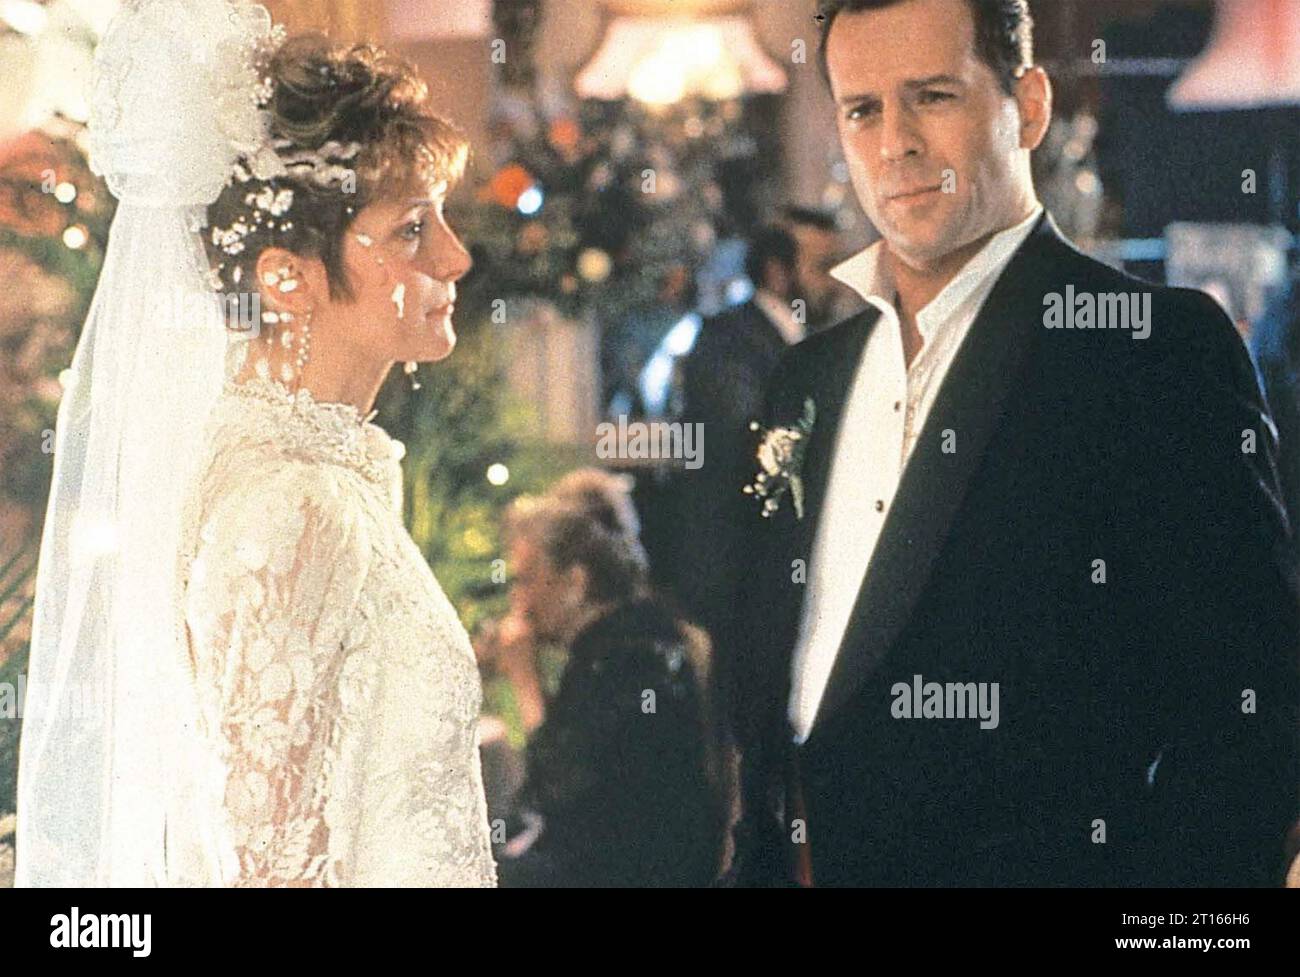 MORAL THOUGHT 1991 Columbia Pictures Film mit Bruce Willis und Glenne Headly Stockfoto